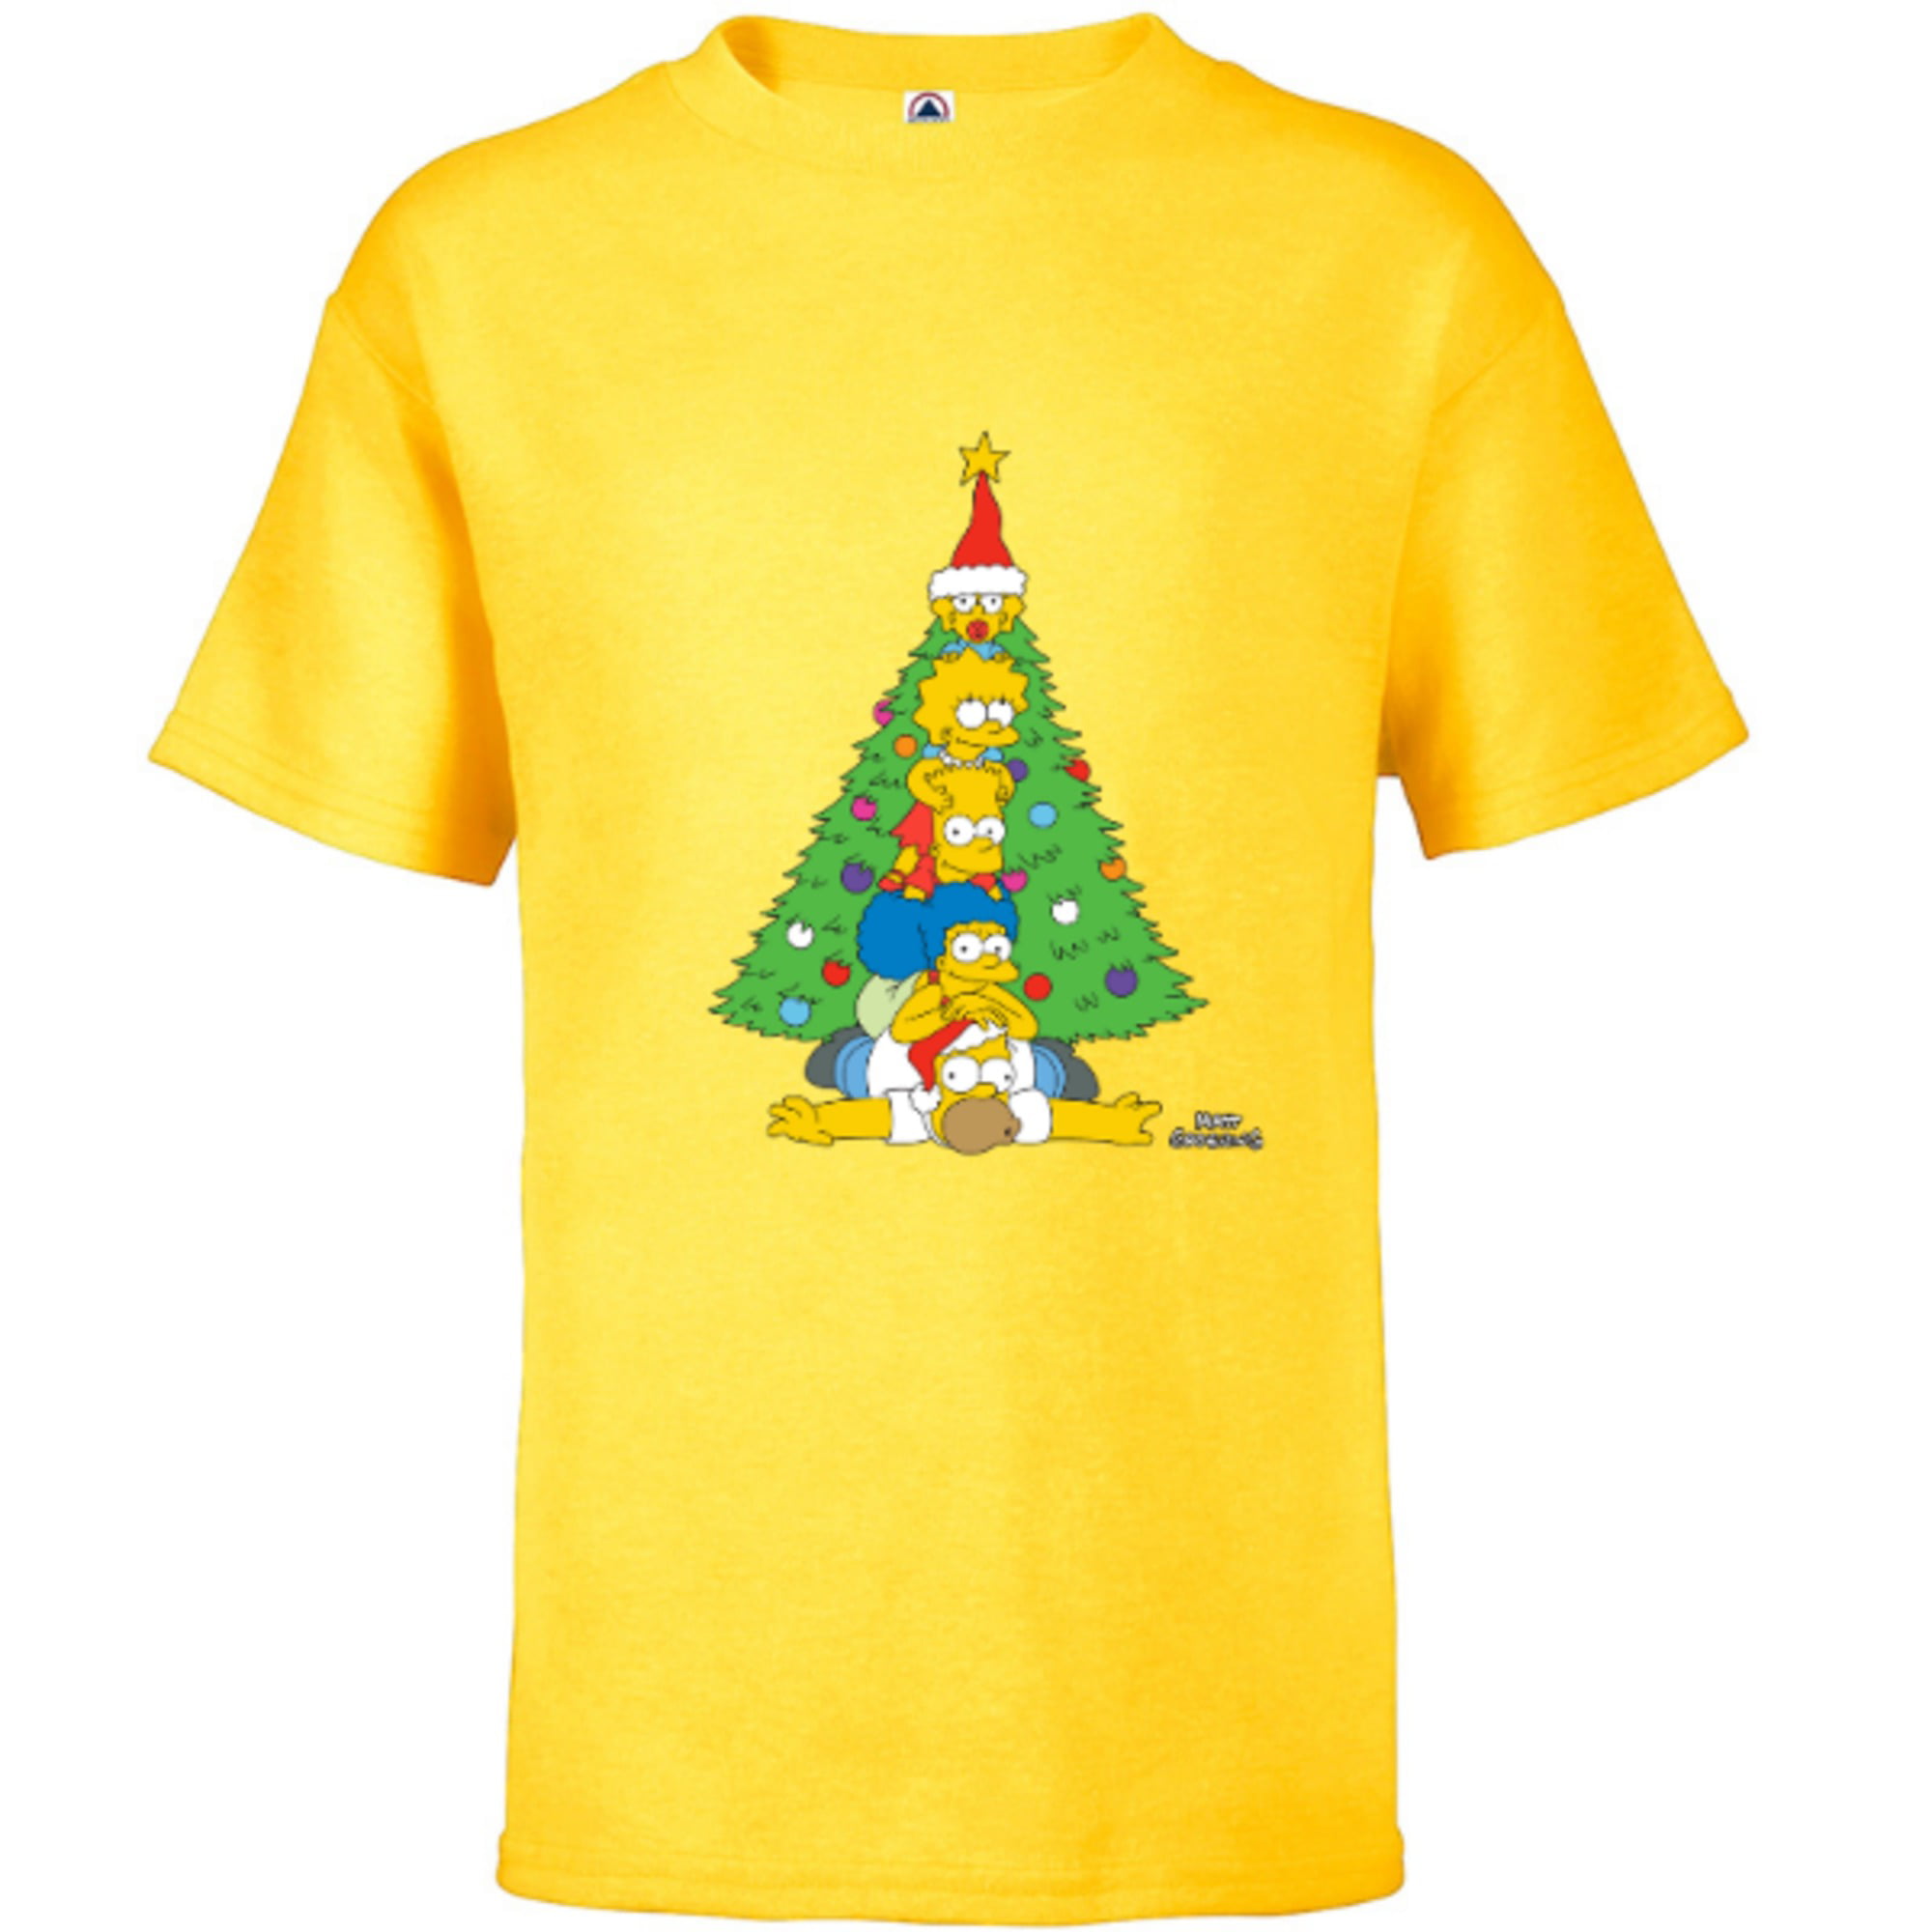 Simpsons The – Christmas Tree - Family for Short Kids Holiday Customized-Red T-Shirt Sleeve